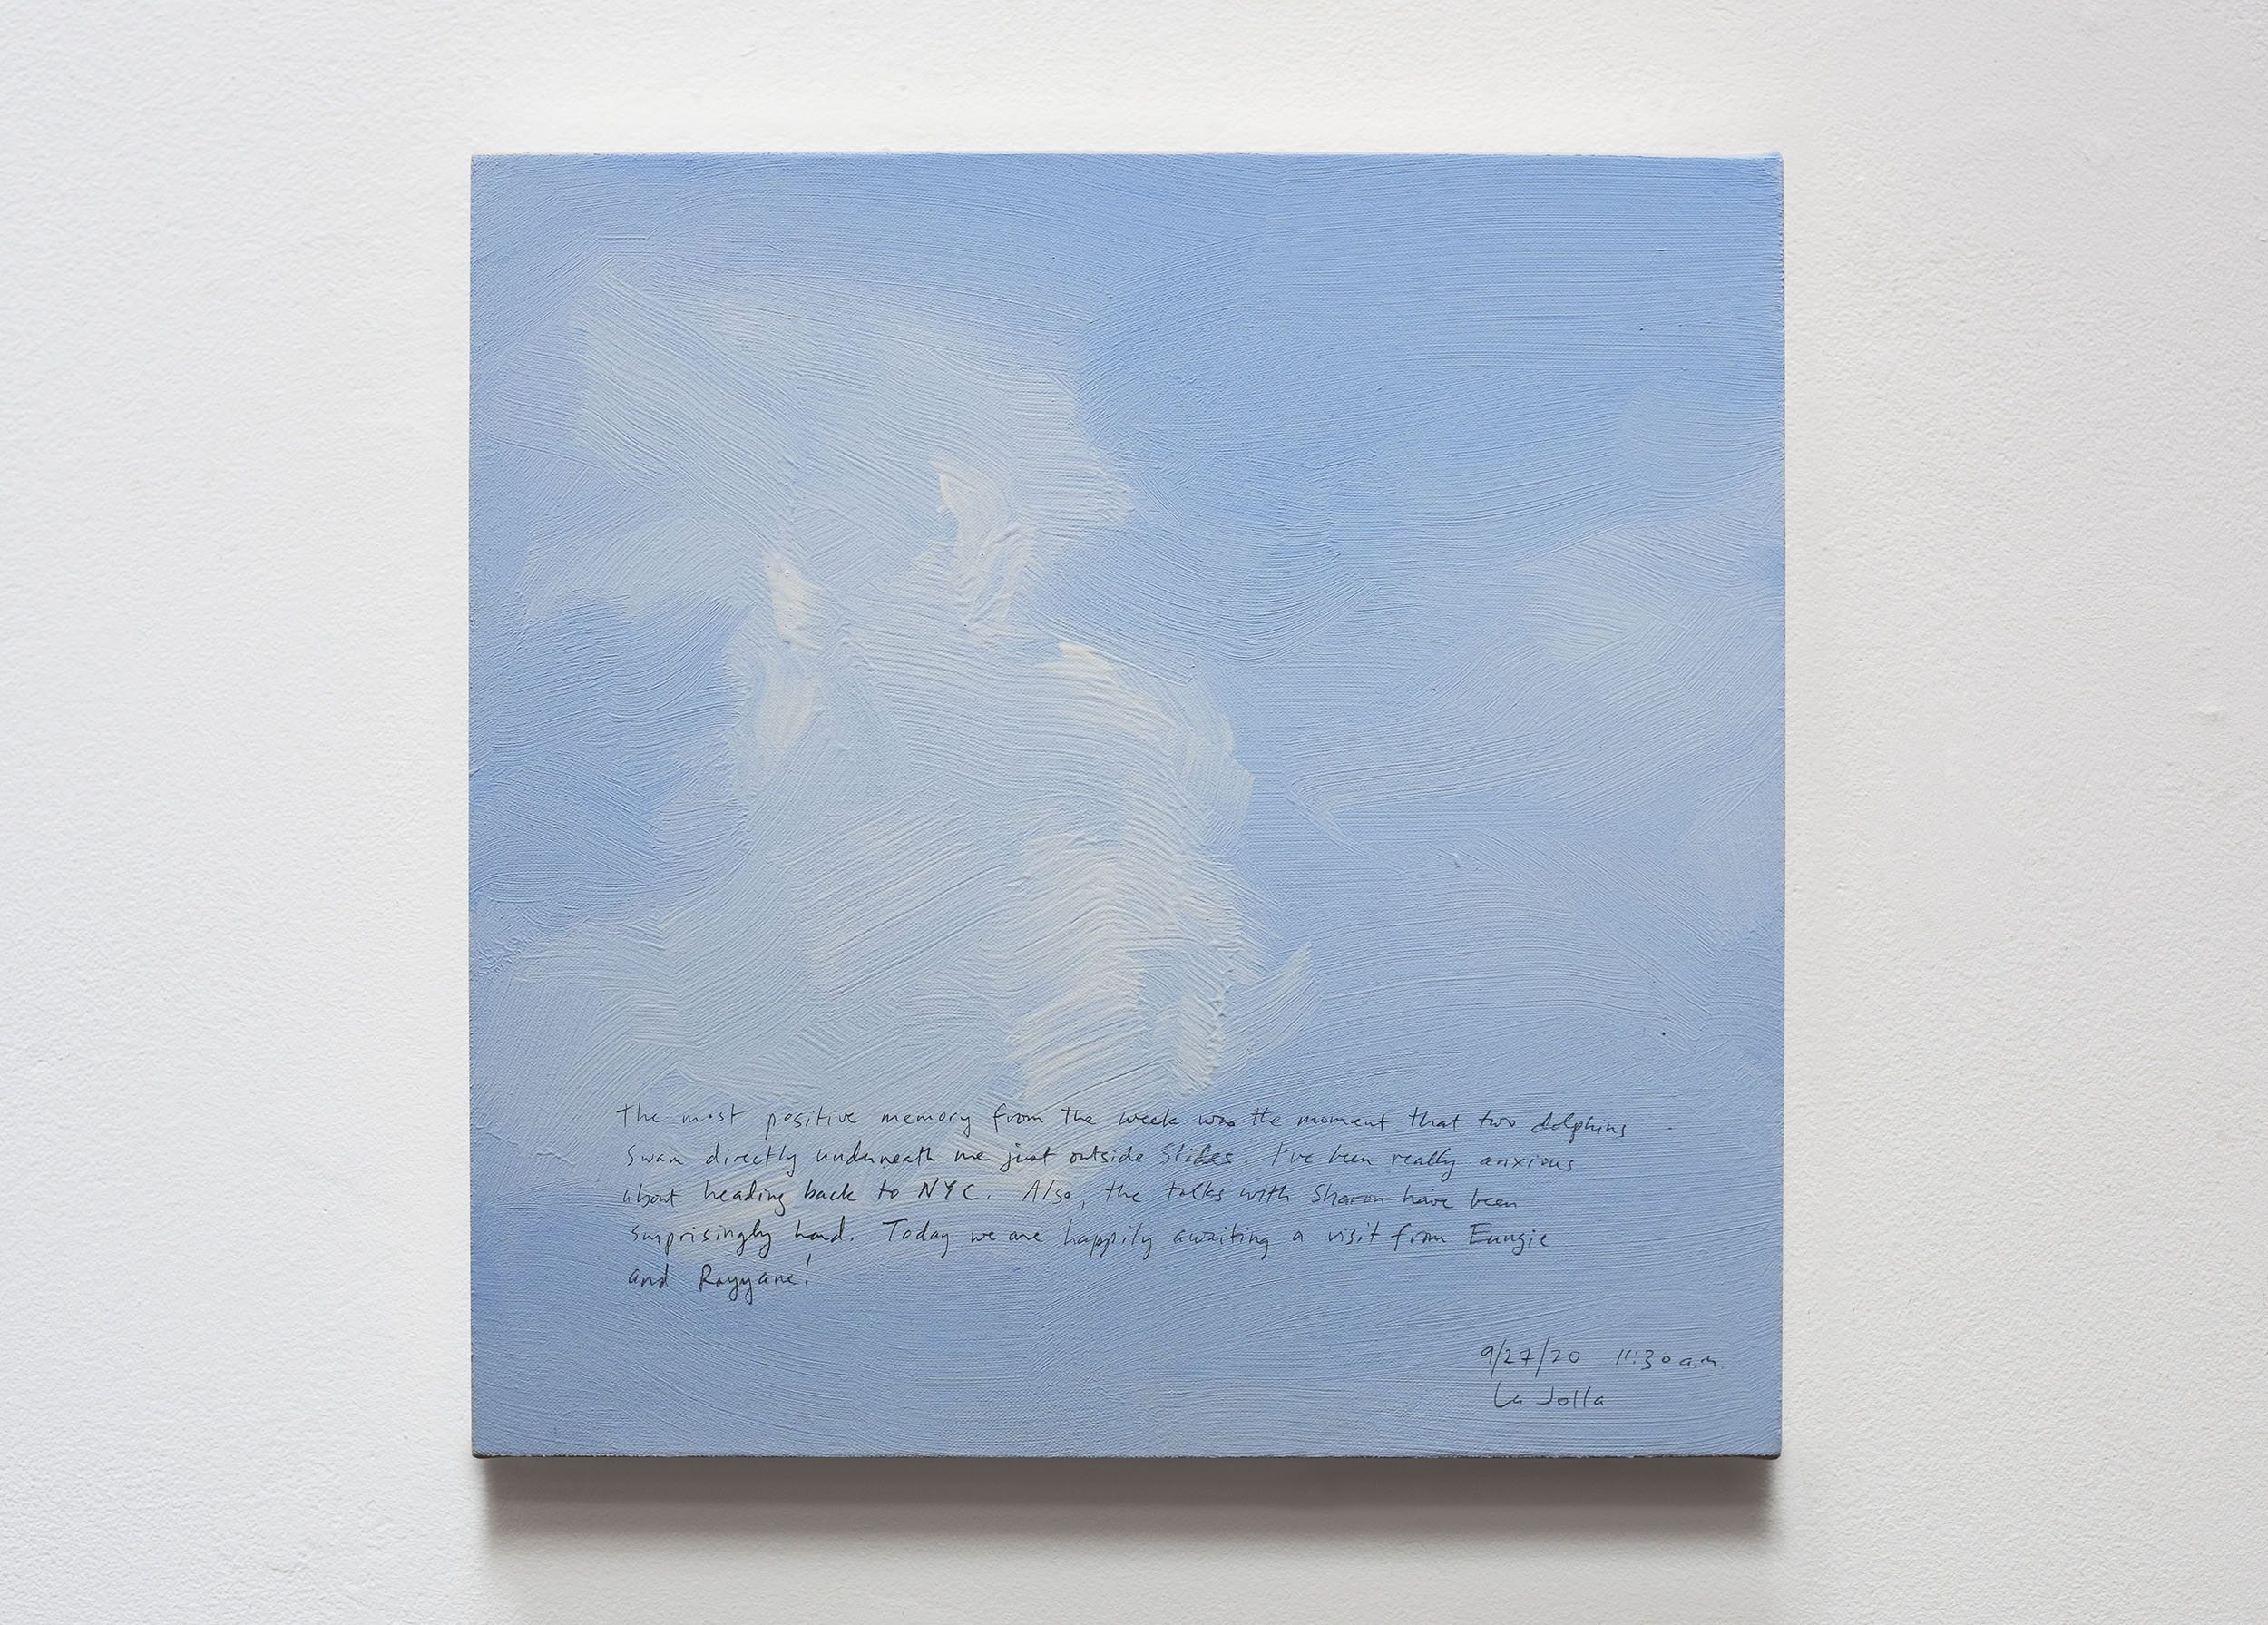 A 14 × 14 inch, acrylic painting of the sky. A journal entry is handwritten on the painting:

“The most positive memory from the week was the moment that two dolphins swam directly underneath me just outside slides. I’ve been really anxious about heading back to NYC. Also, the talks with Sharon have been surprisingly hard. Today we are happily awaiting a visit from Eungie and Rayyane!

9/27/20 11:30 am
La Jolla”